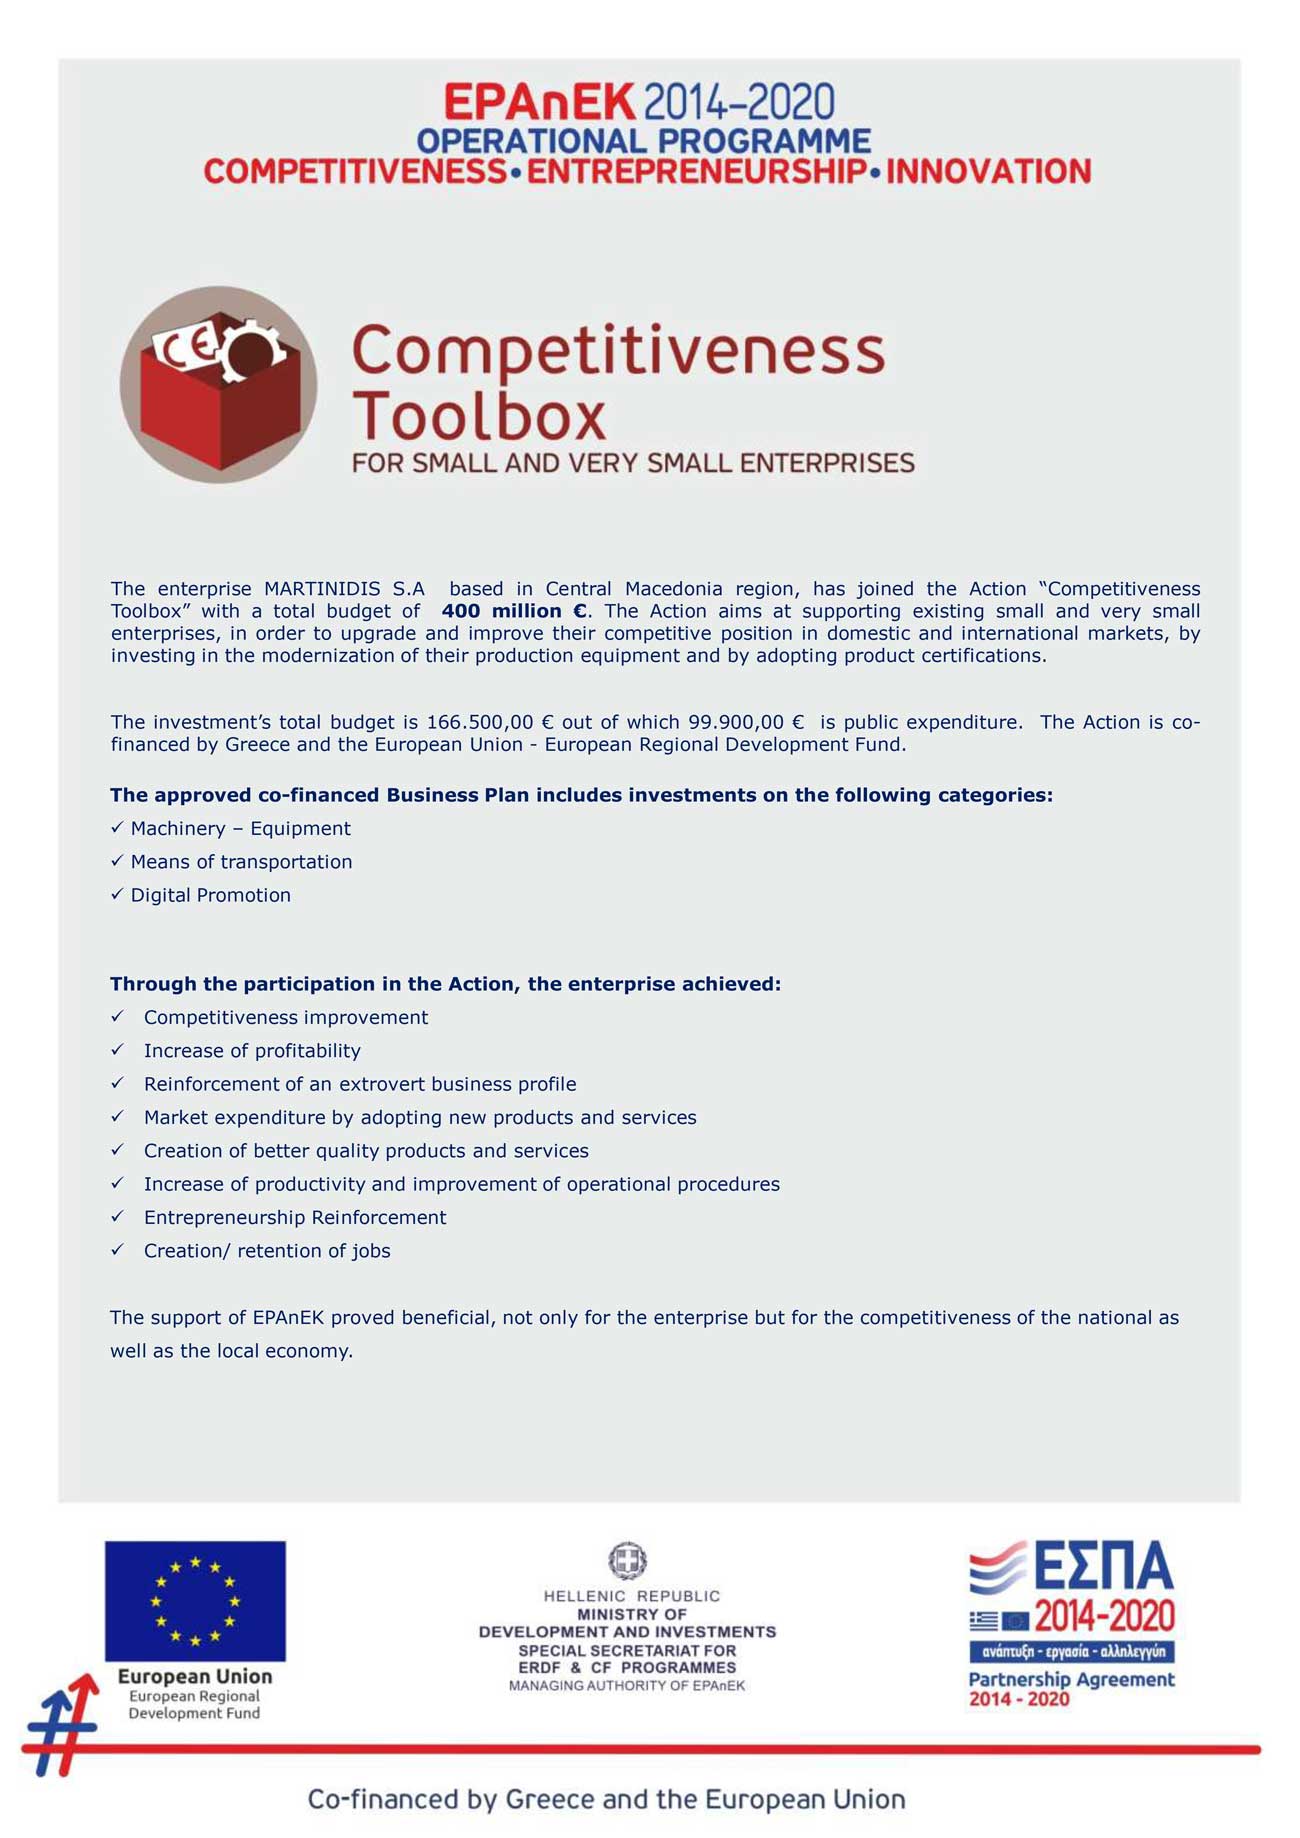 Competitiveness Toolbox